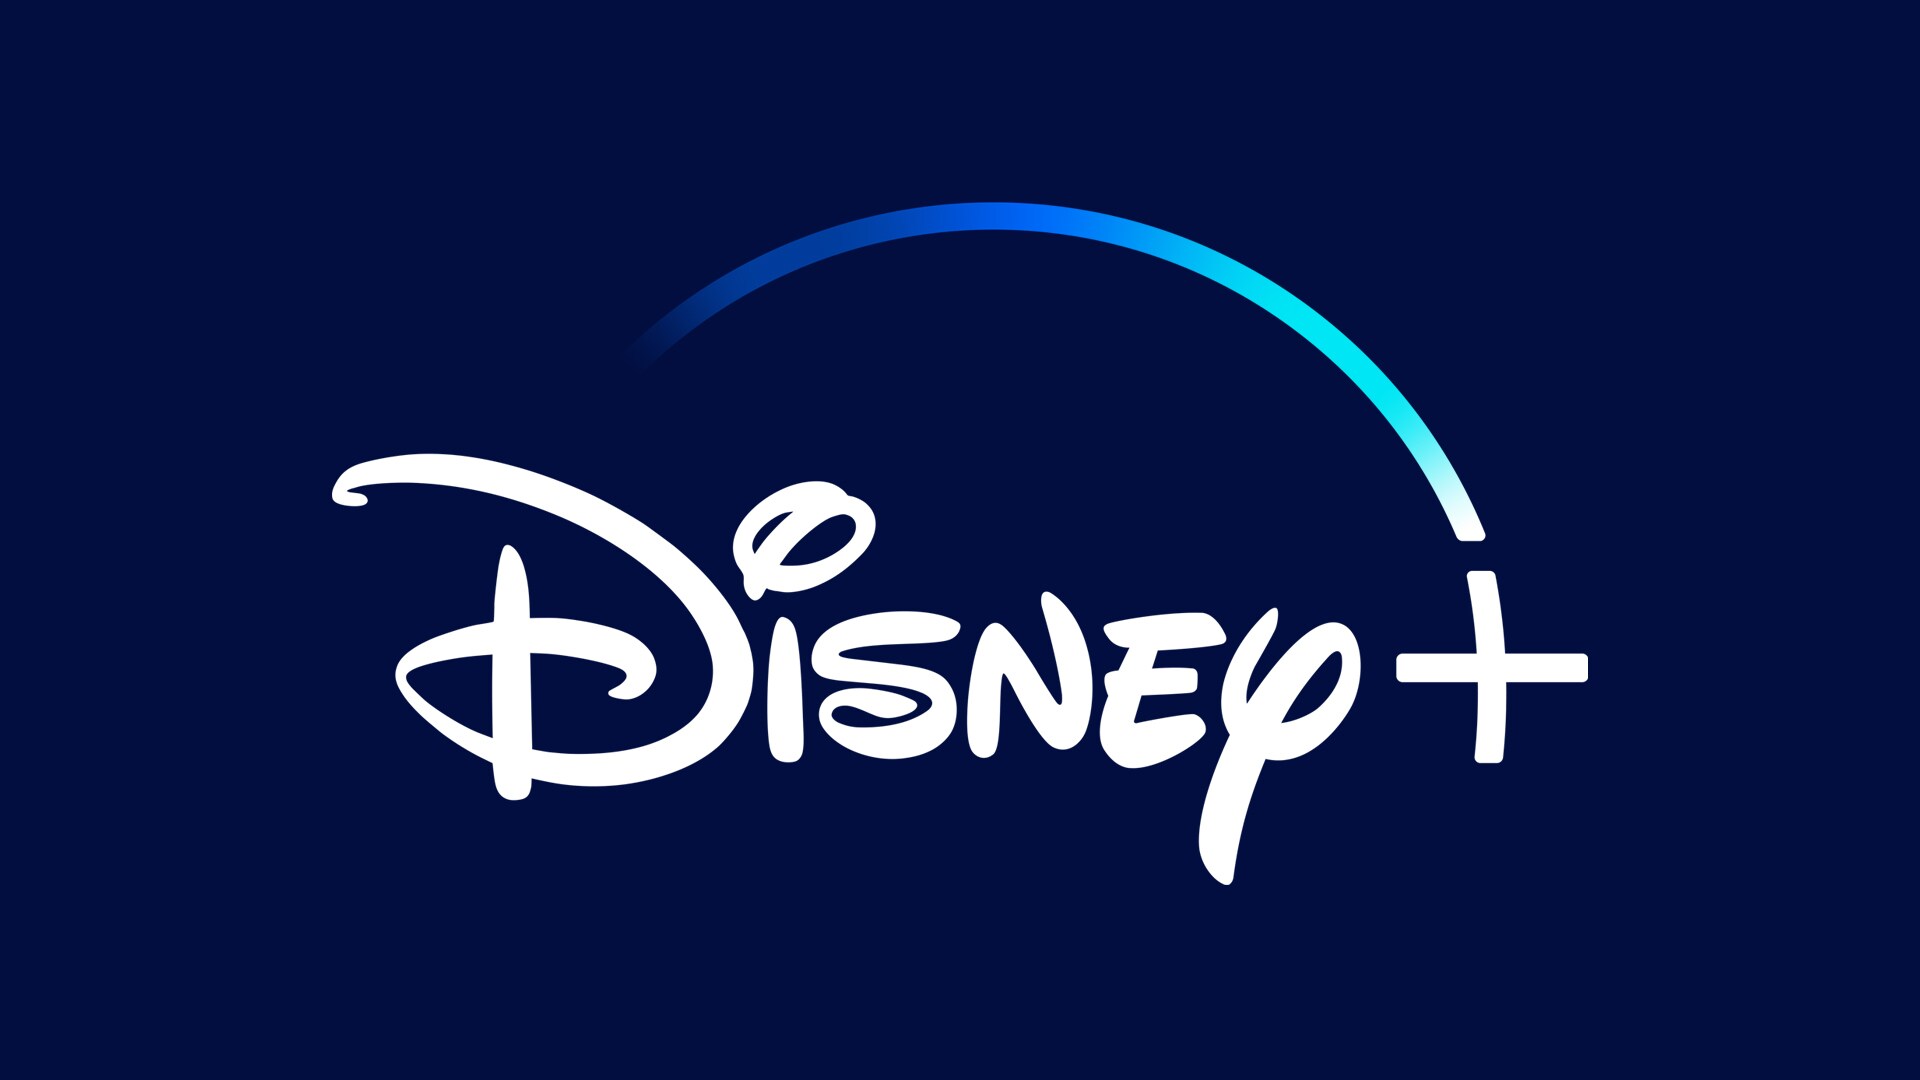 DISNEY+ REVEALS THE FIRST LOOK OF THE UPCOMING LIMITED SERIES A SMALL LIGHT